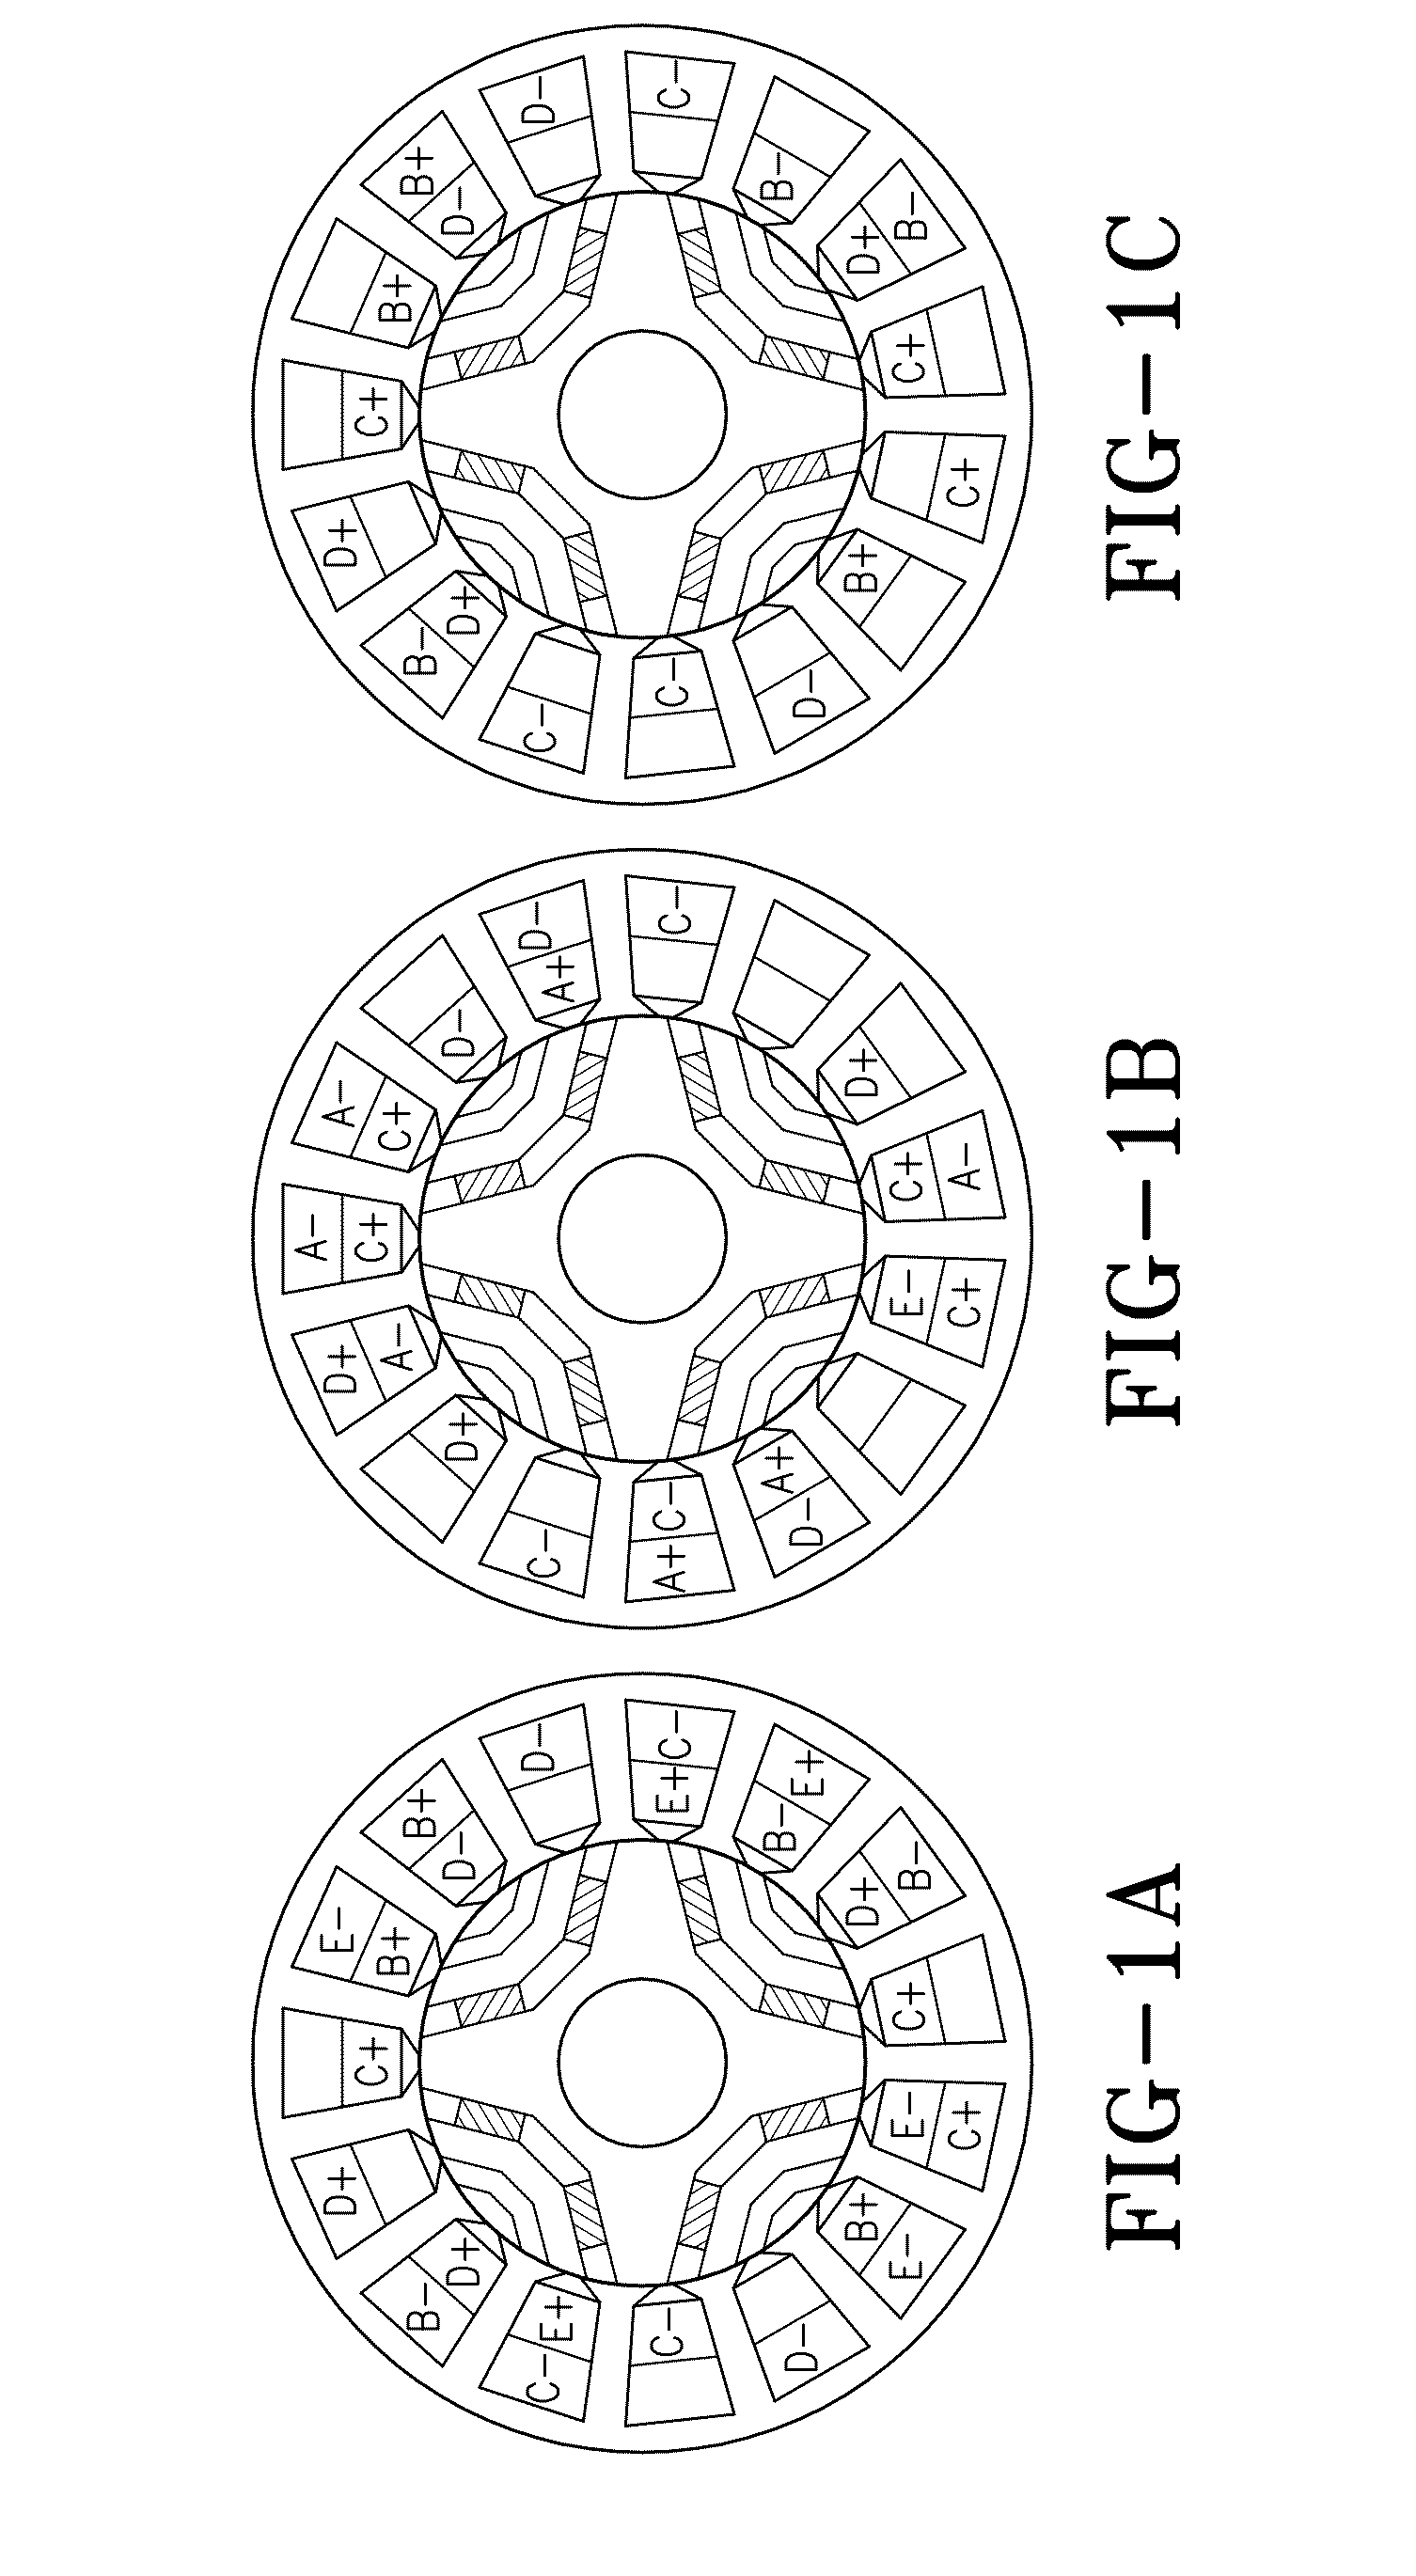 Fault tolerant control system for multi-phase permanent magnet assisted synchronous reluctance motors